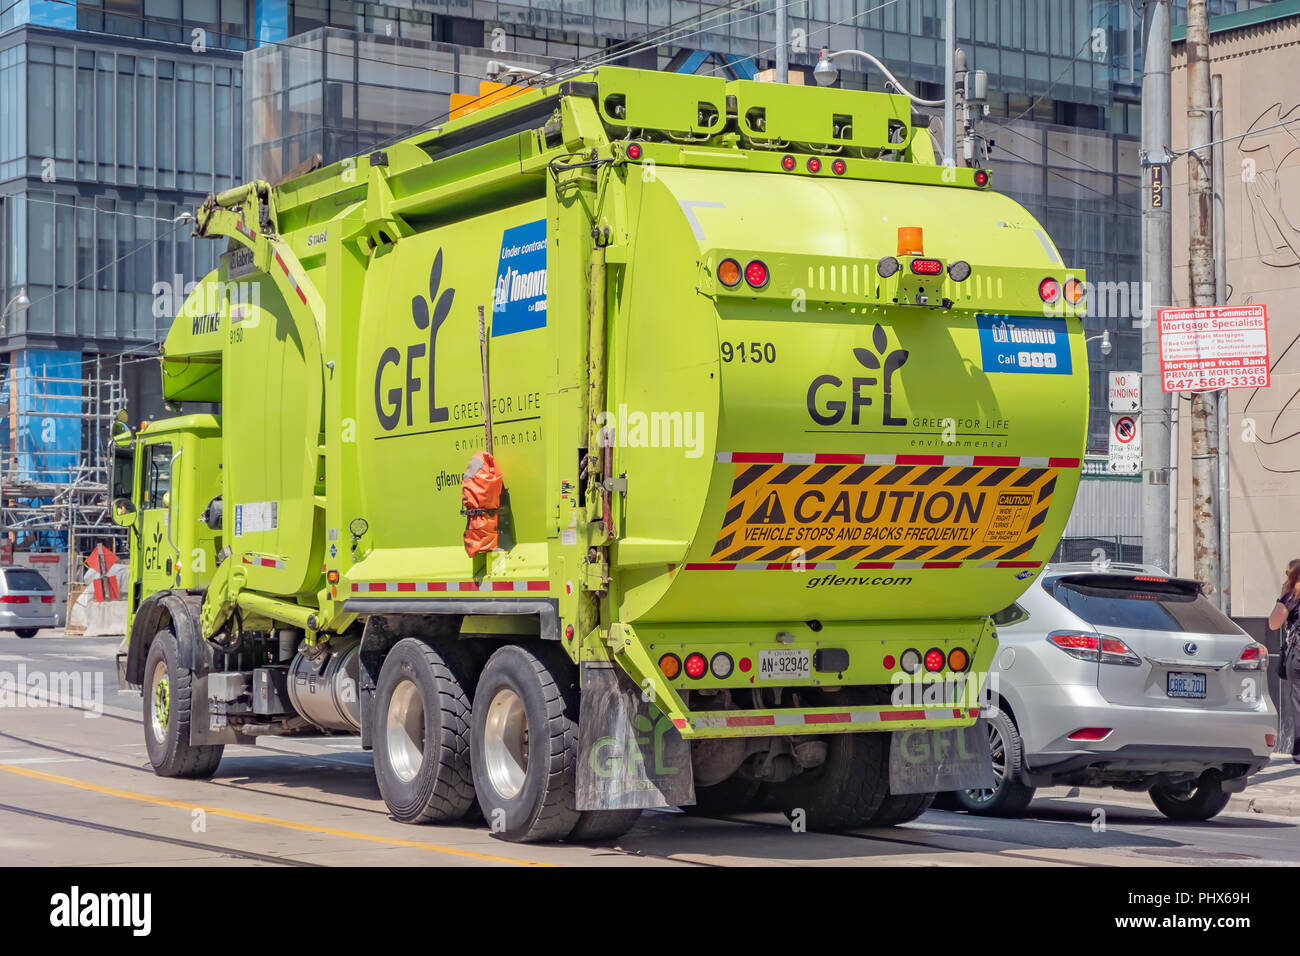 How Garbage Trucks manage the waste?